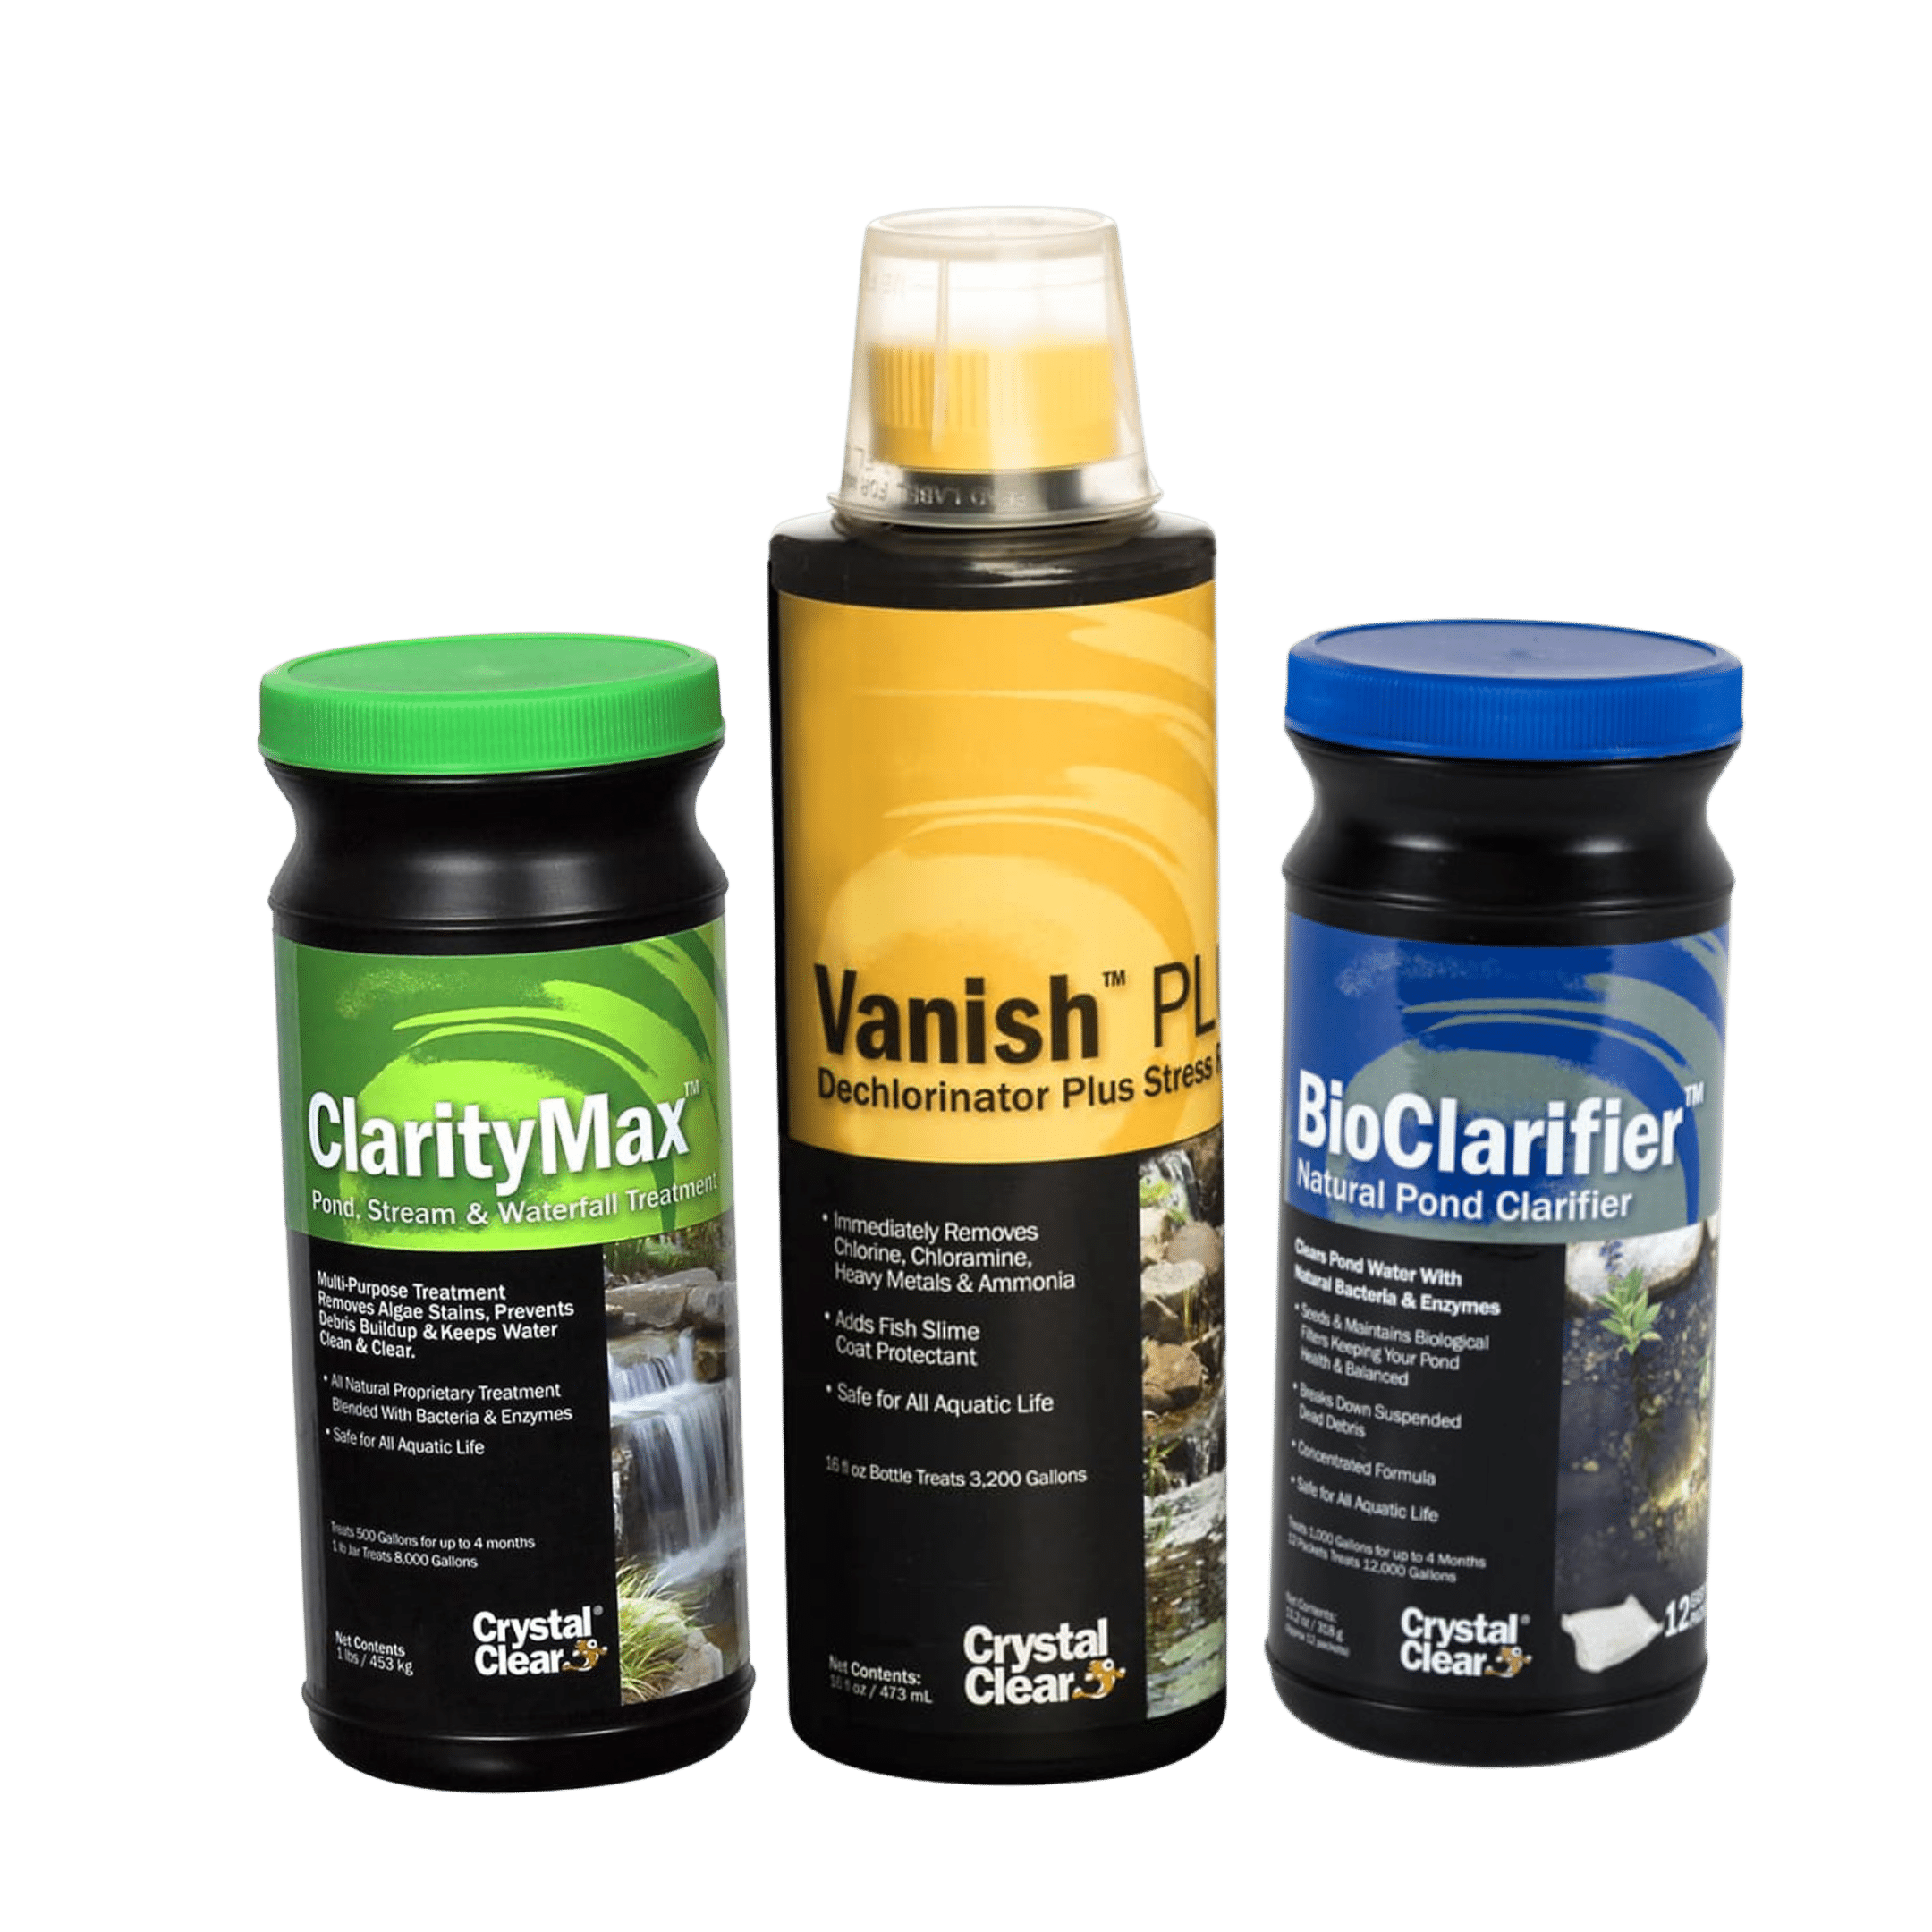 Our set of Trusted Treatments are designed to work with mother nature to provide a healthy and clean pond environment. With billions of beneficial bacteria and a special blend of phosphate binders and natural enzymes, this bundle can treat a 500 gallon pond for 4 months.